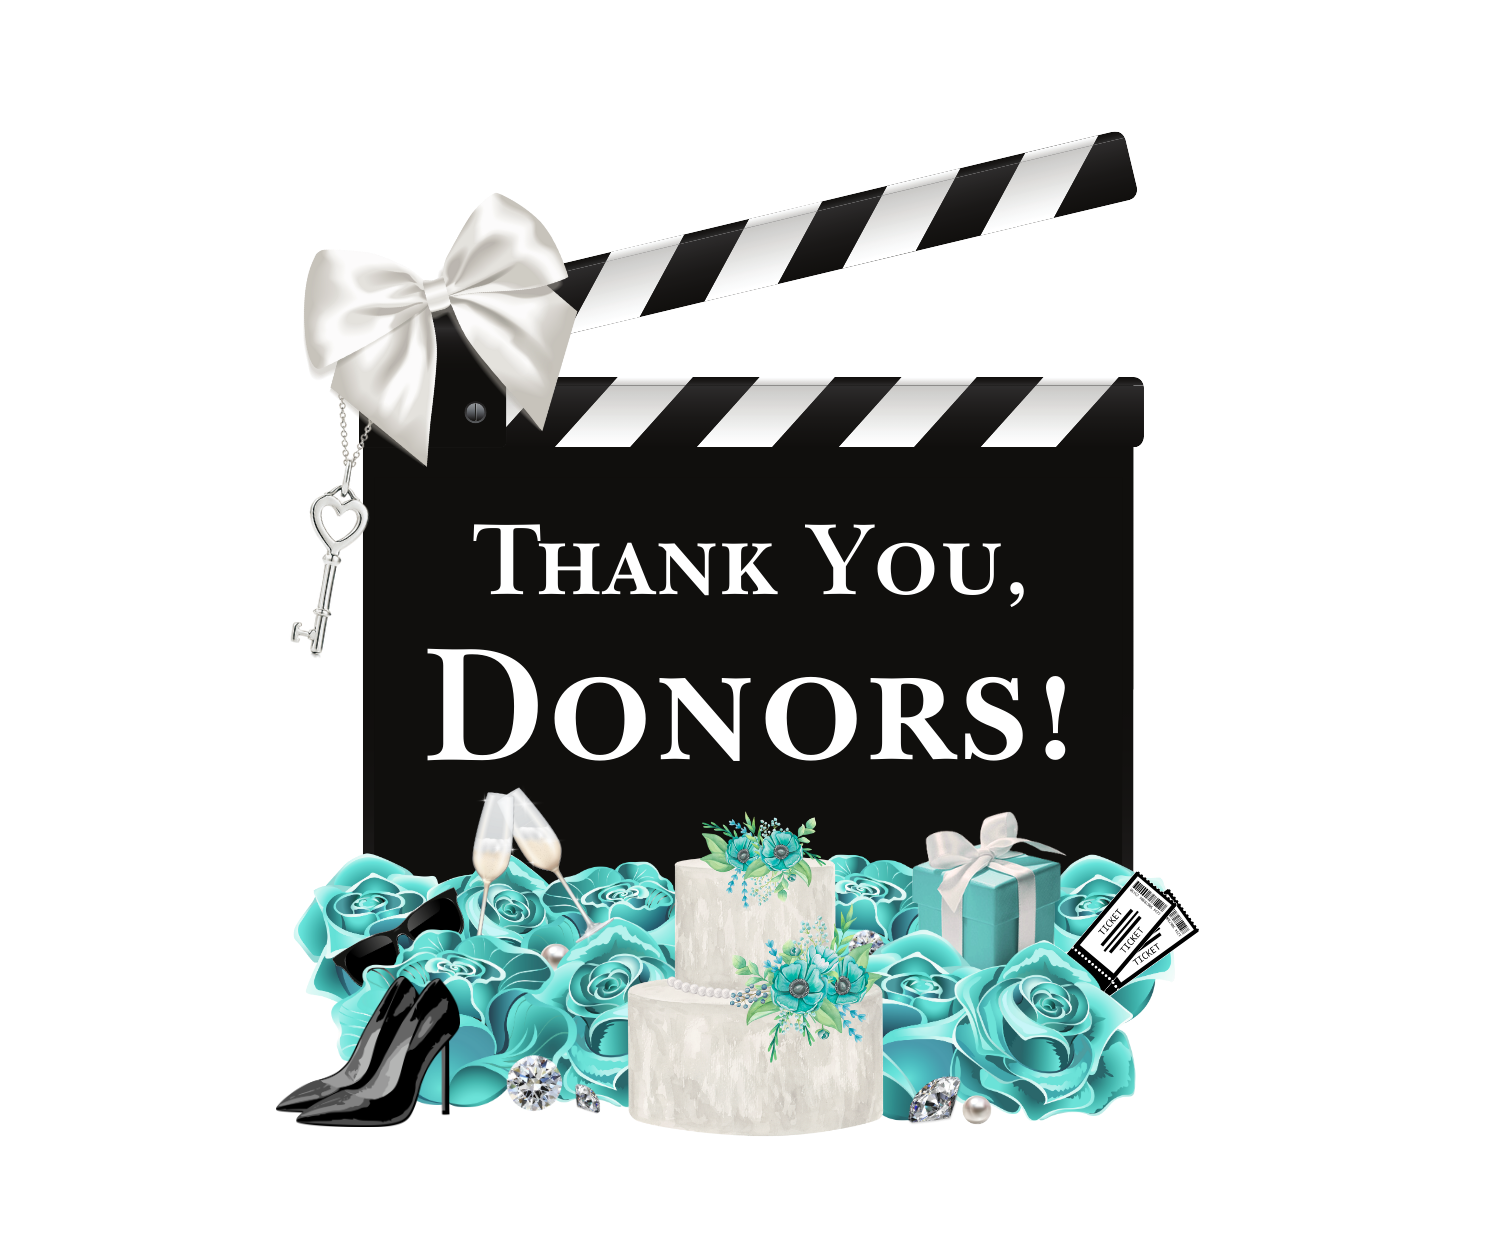 Thank You, Donors!